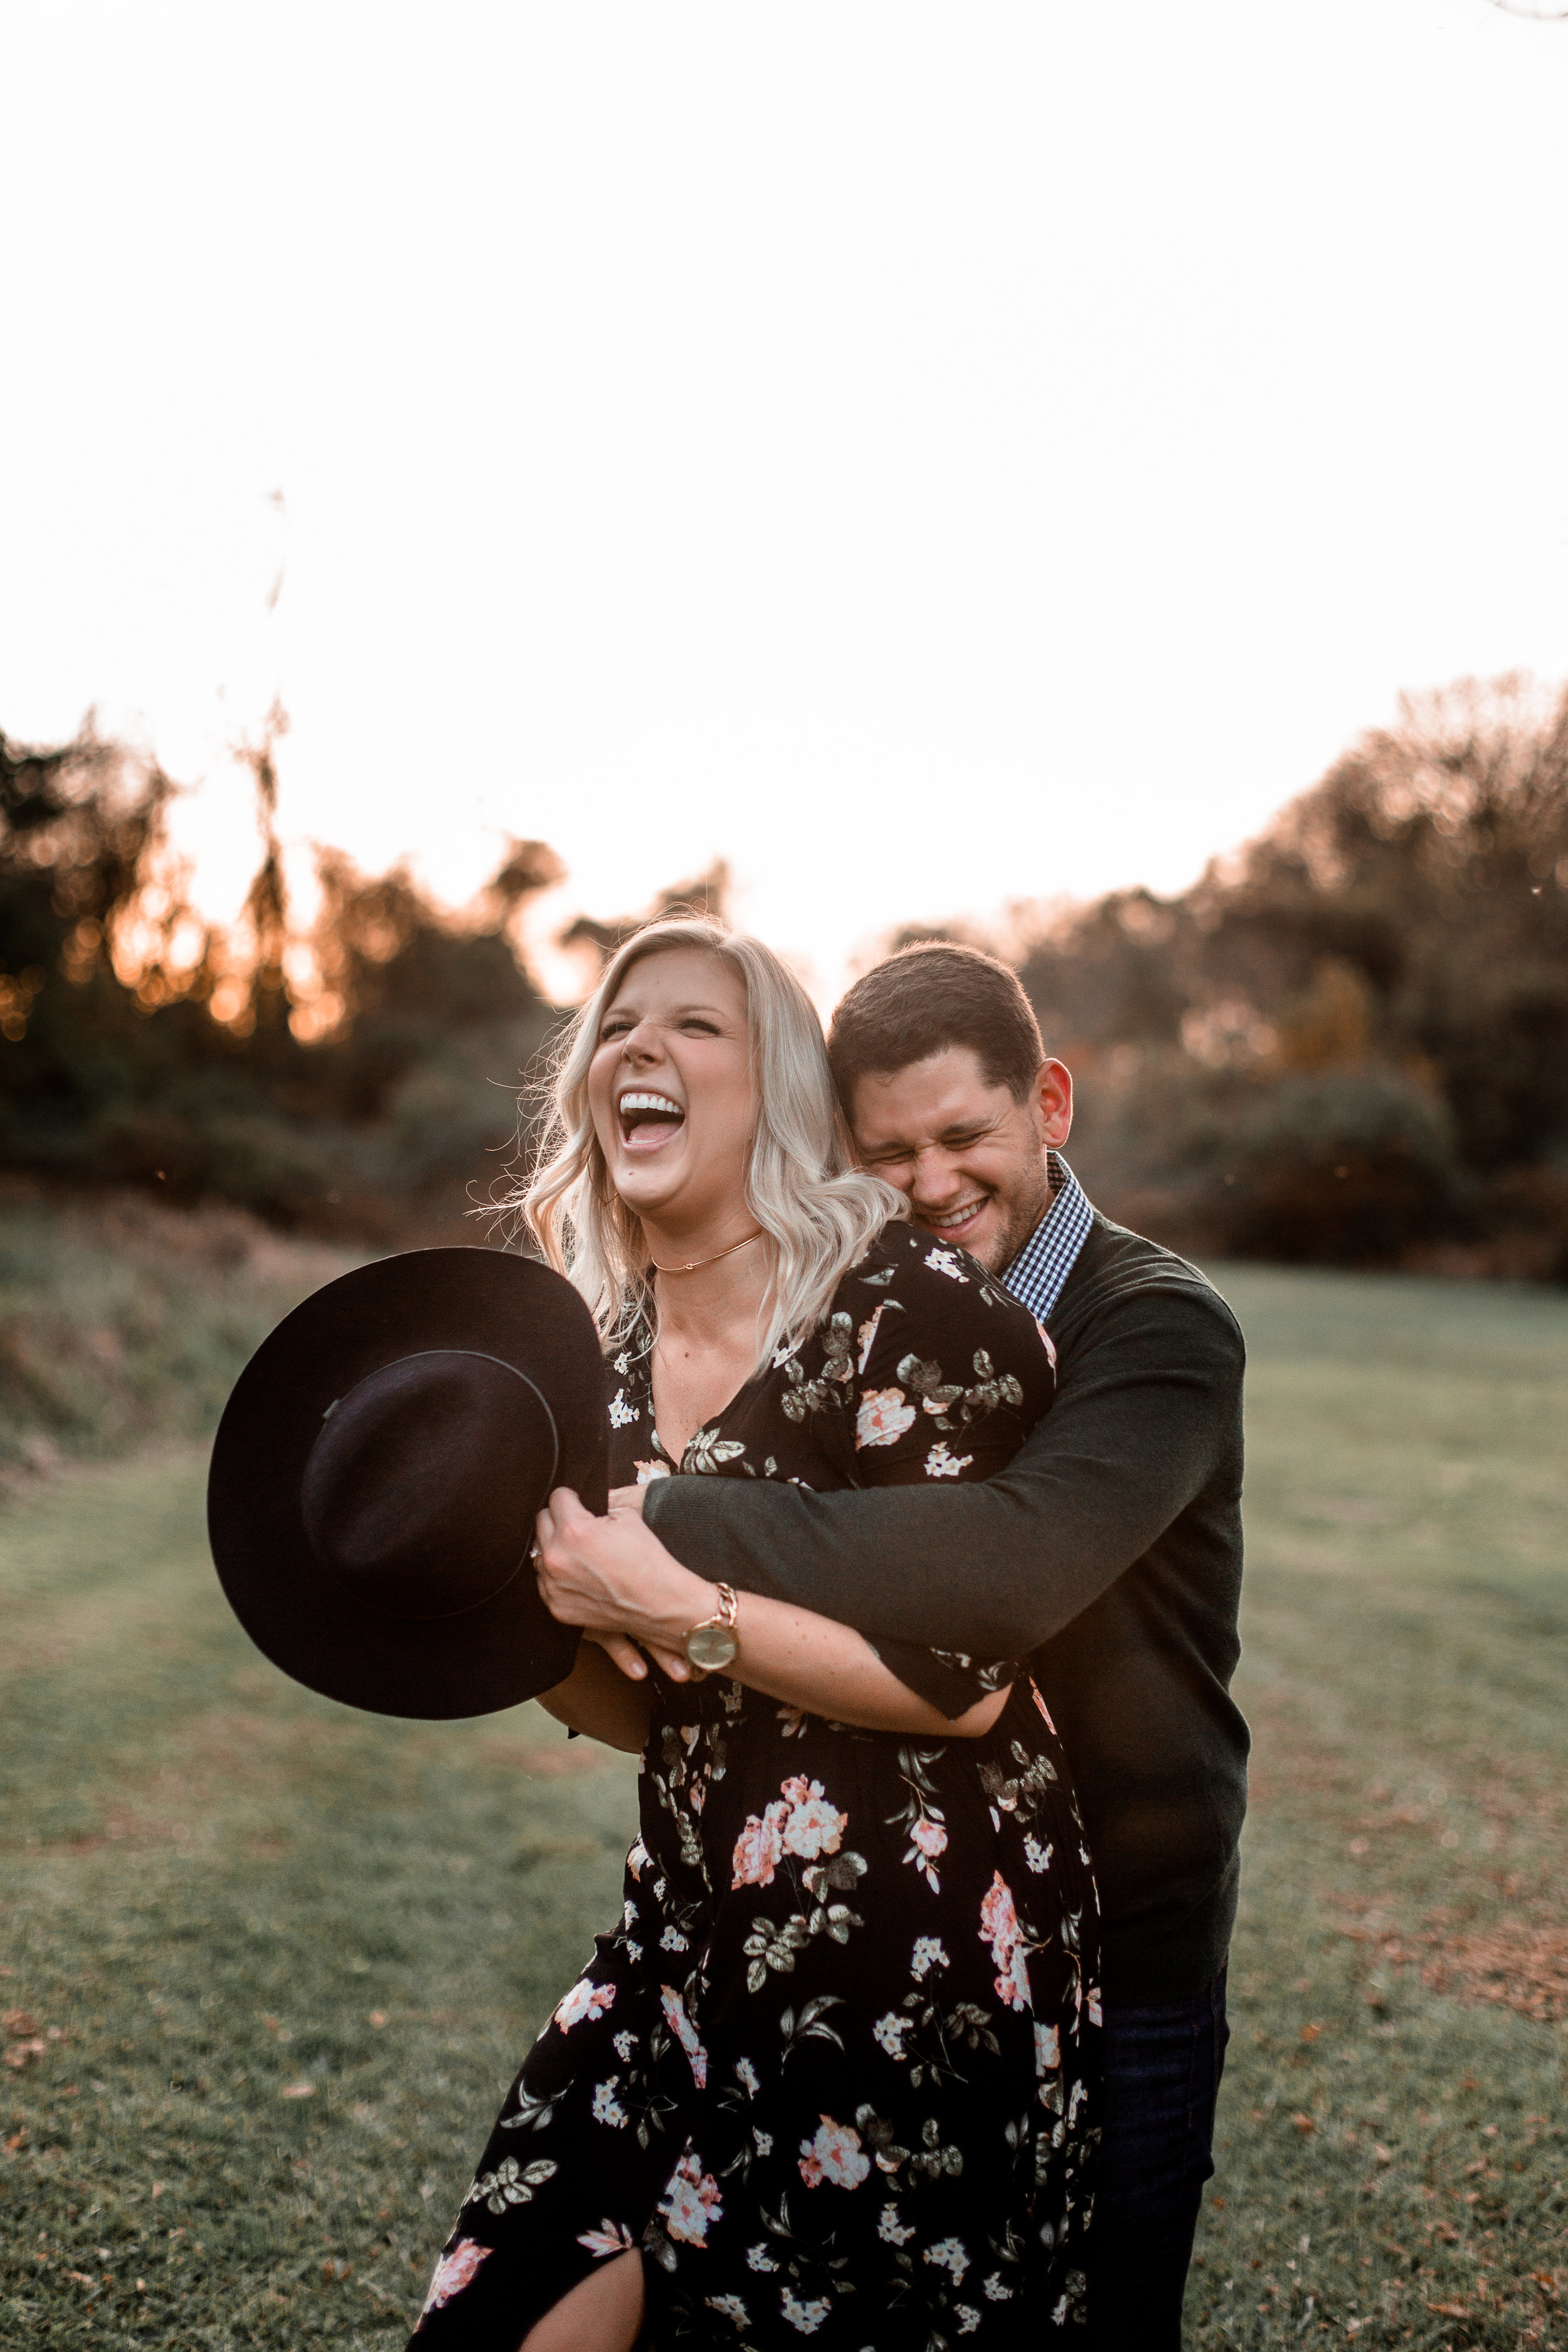 nicole-daacke-photography-carefree-bohemian-lancaster-pa-pennsylvania-engagement-photos-engagement-session-golden-sunset-adventure-session-in-lancaster-pa-lancaster-pa-outdoor-wedding-photographer-43.jpg